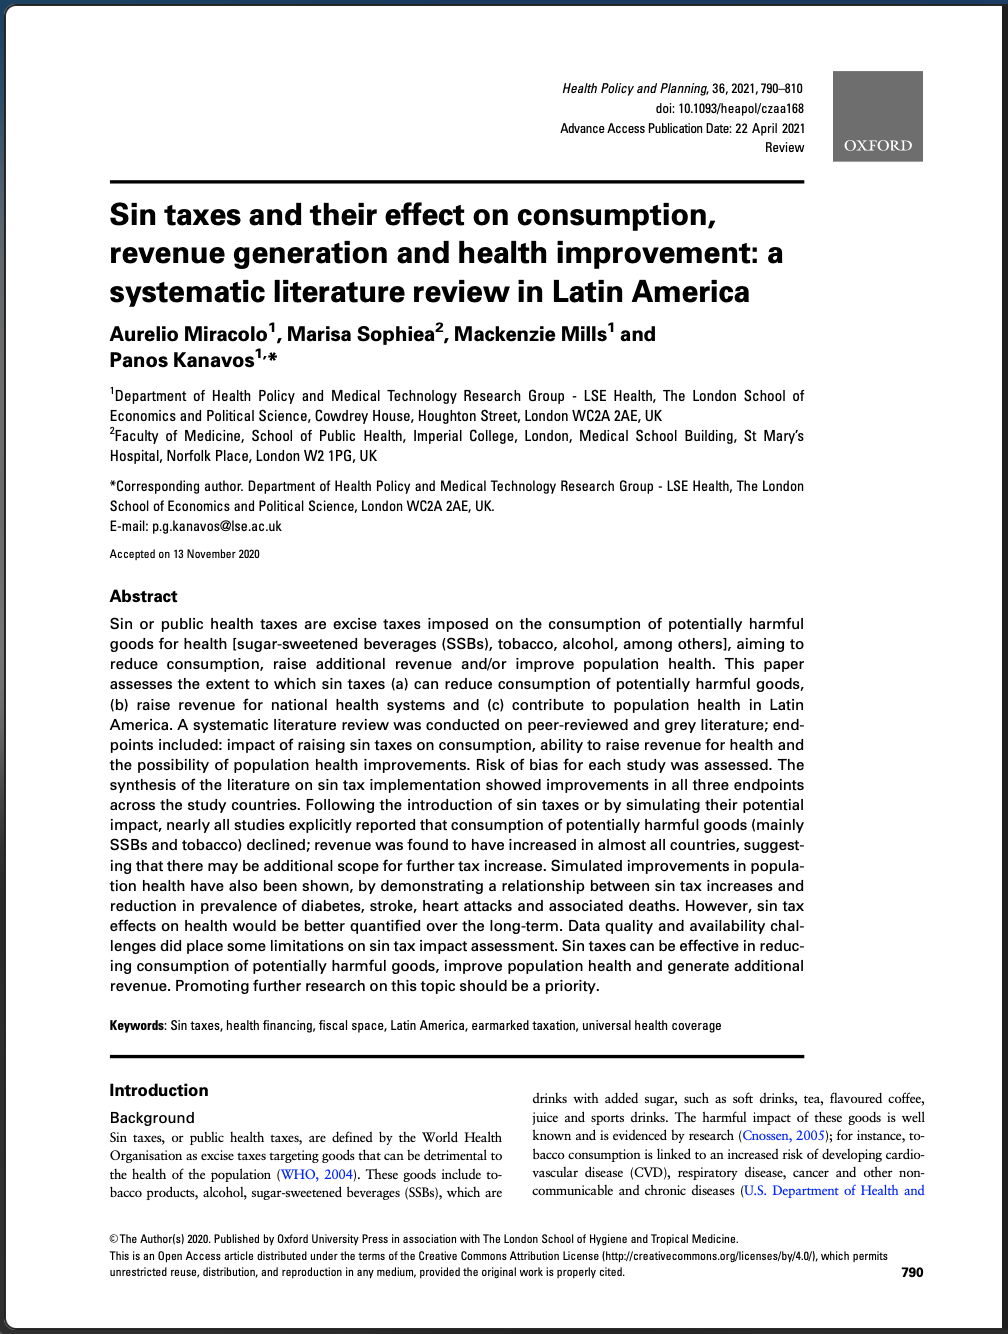 Sin Taxes and Their Effect on Consumption, Revenue Generation and Health Improvement: A Systematic Literature Review in Latin America (Health Policy and Planning 2021)